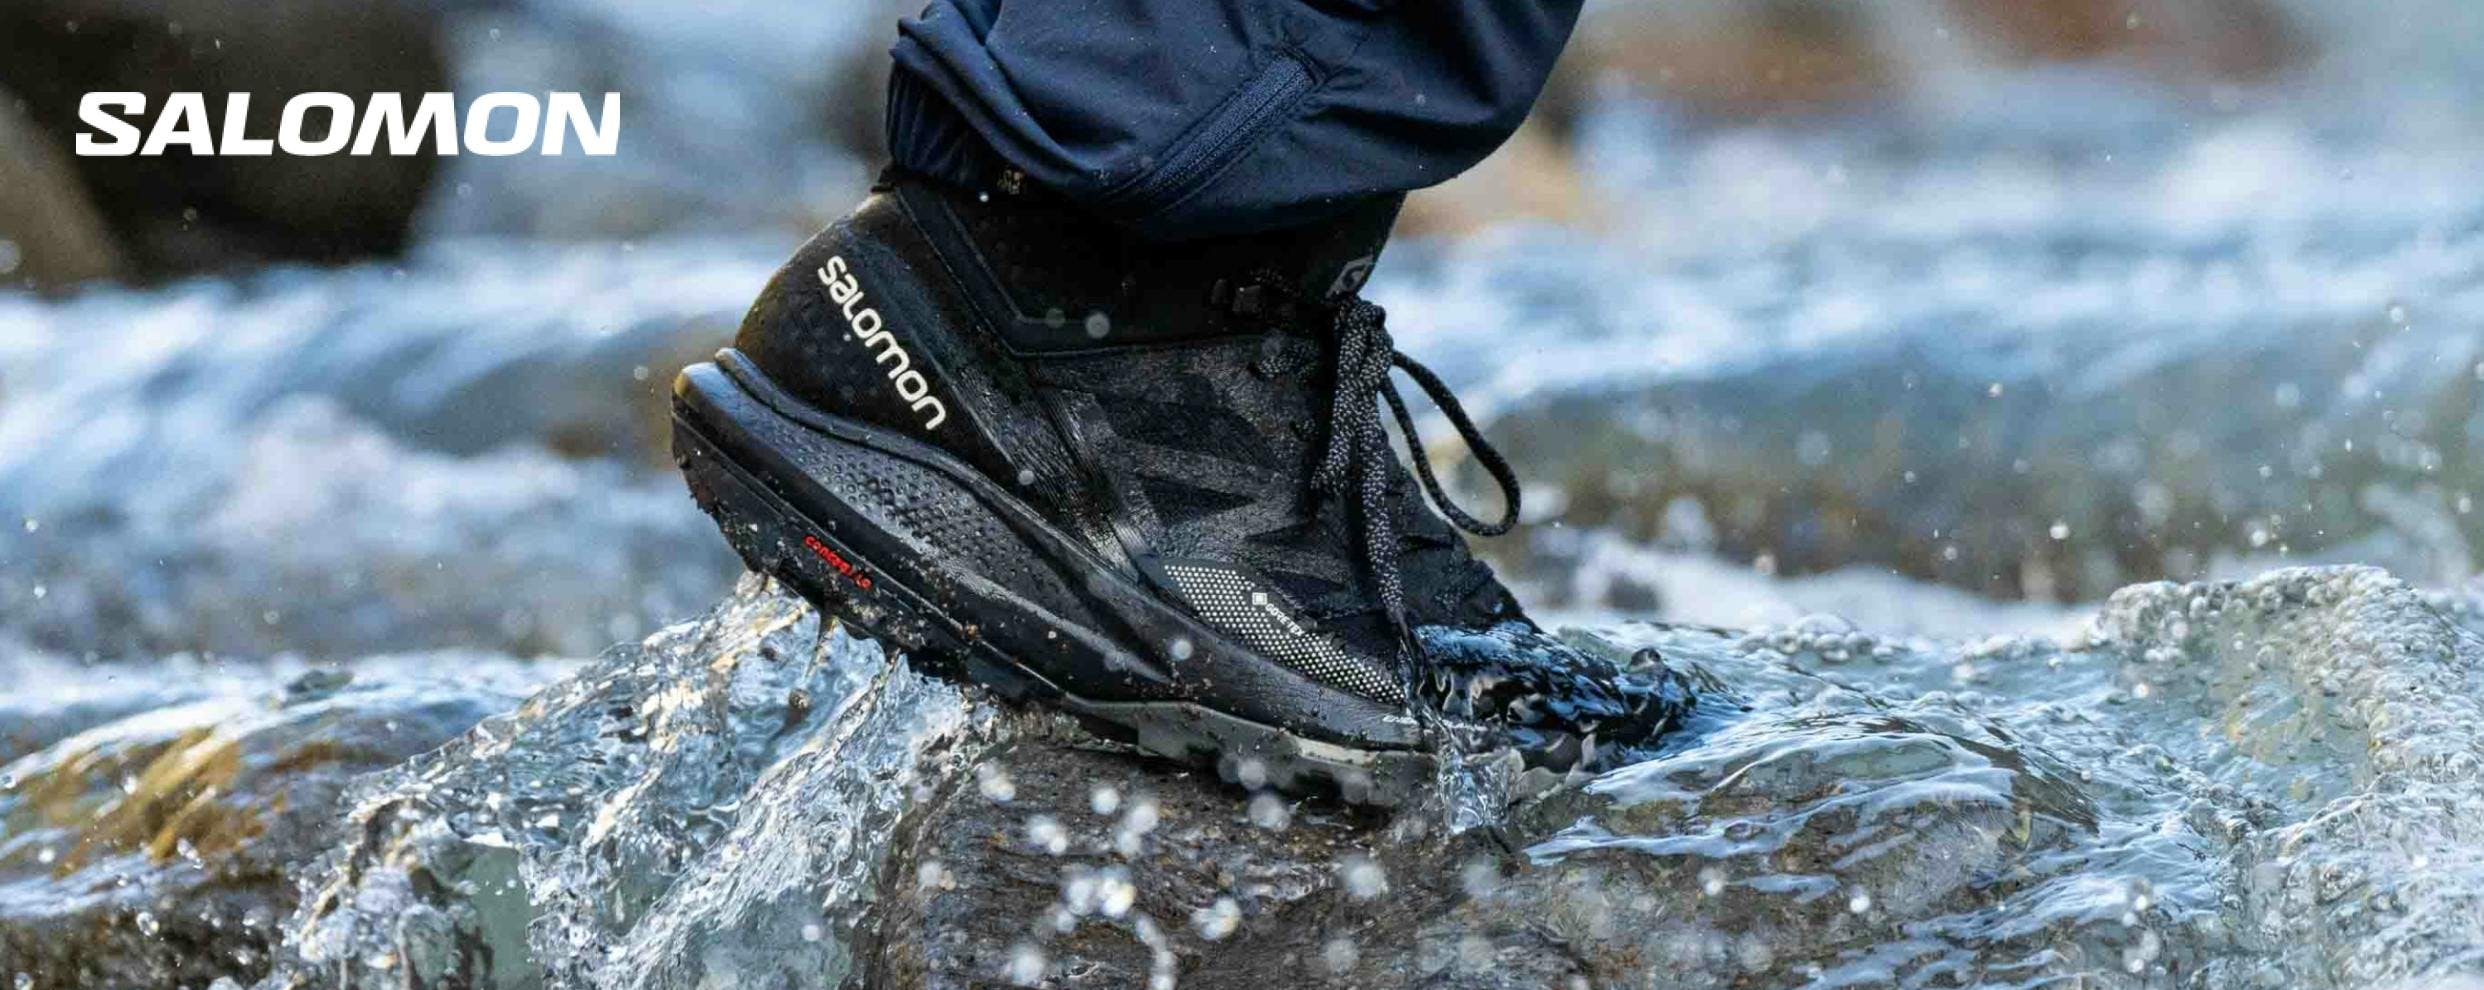 Find the best hiking boots, shoes and more for alpine meadow treks or uphill slogs.